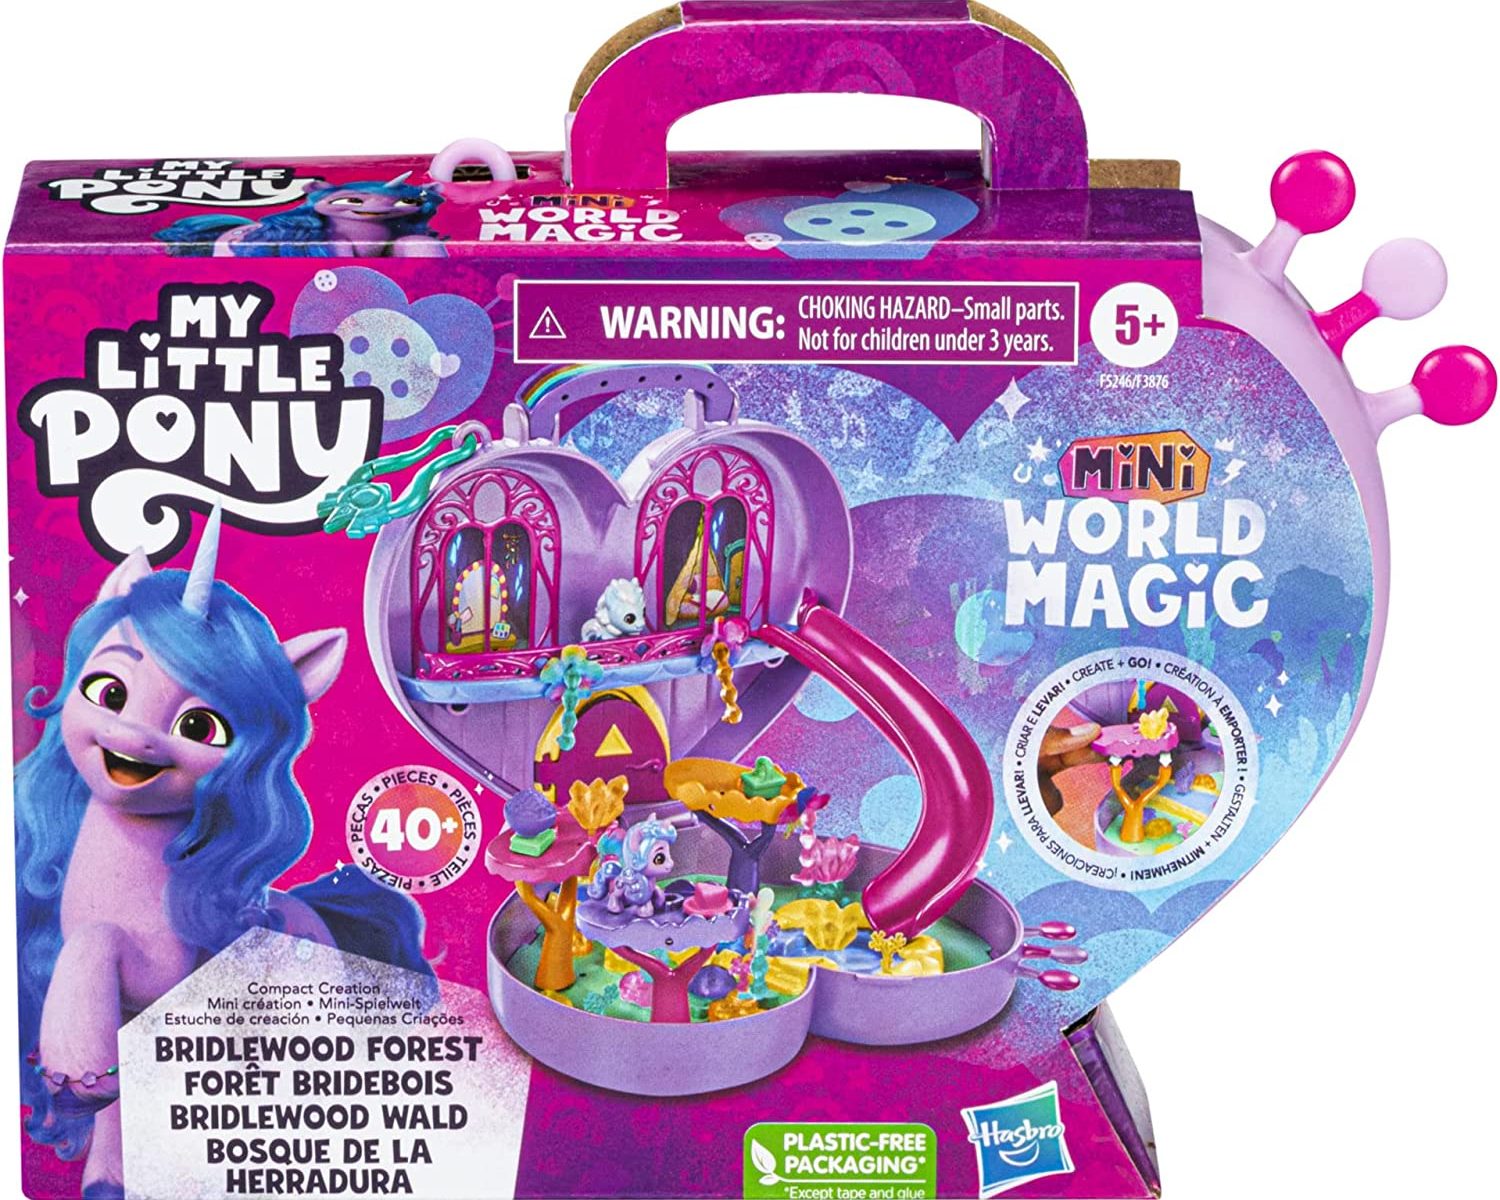 MLP: ANG Mini World Magic Compact Creation Bridlewood Forest Play Set 1